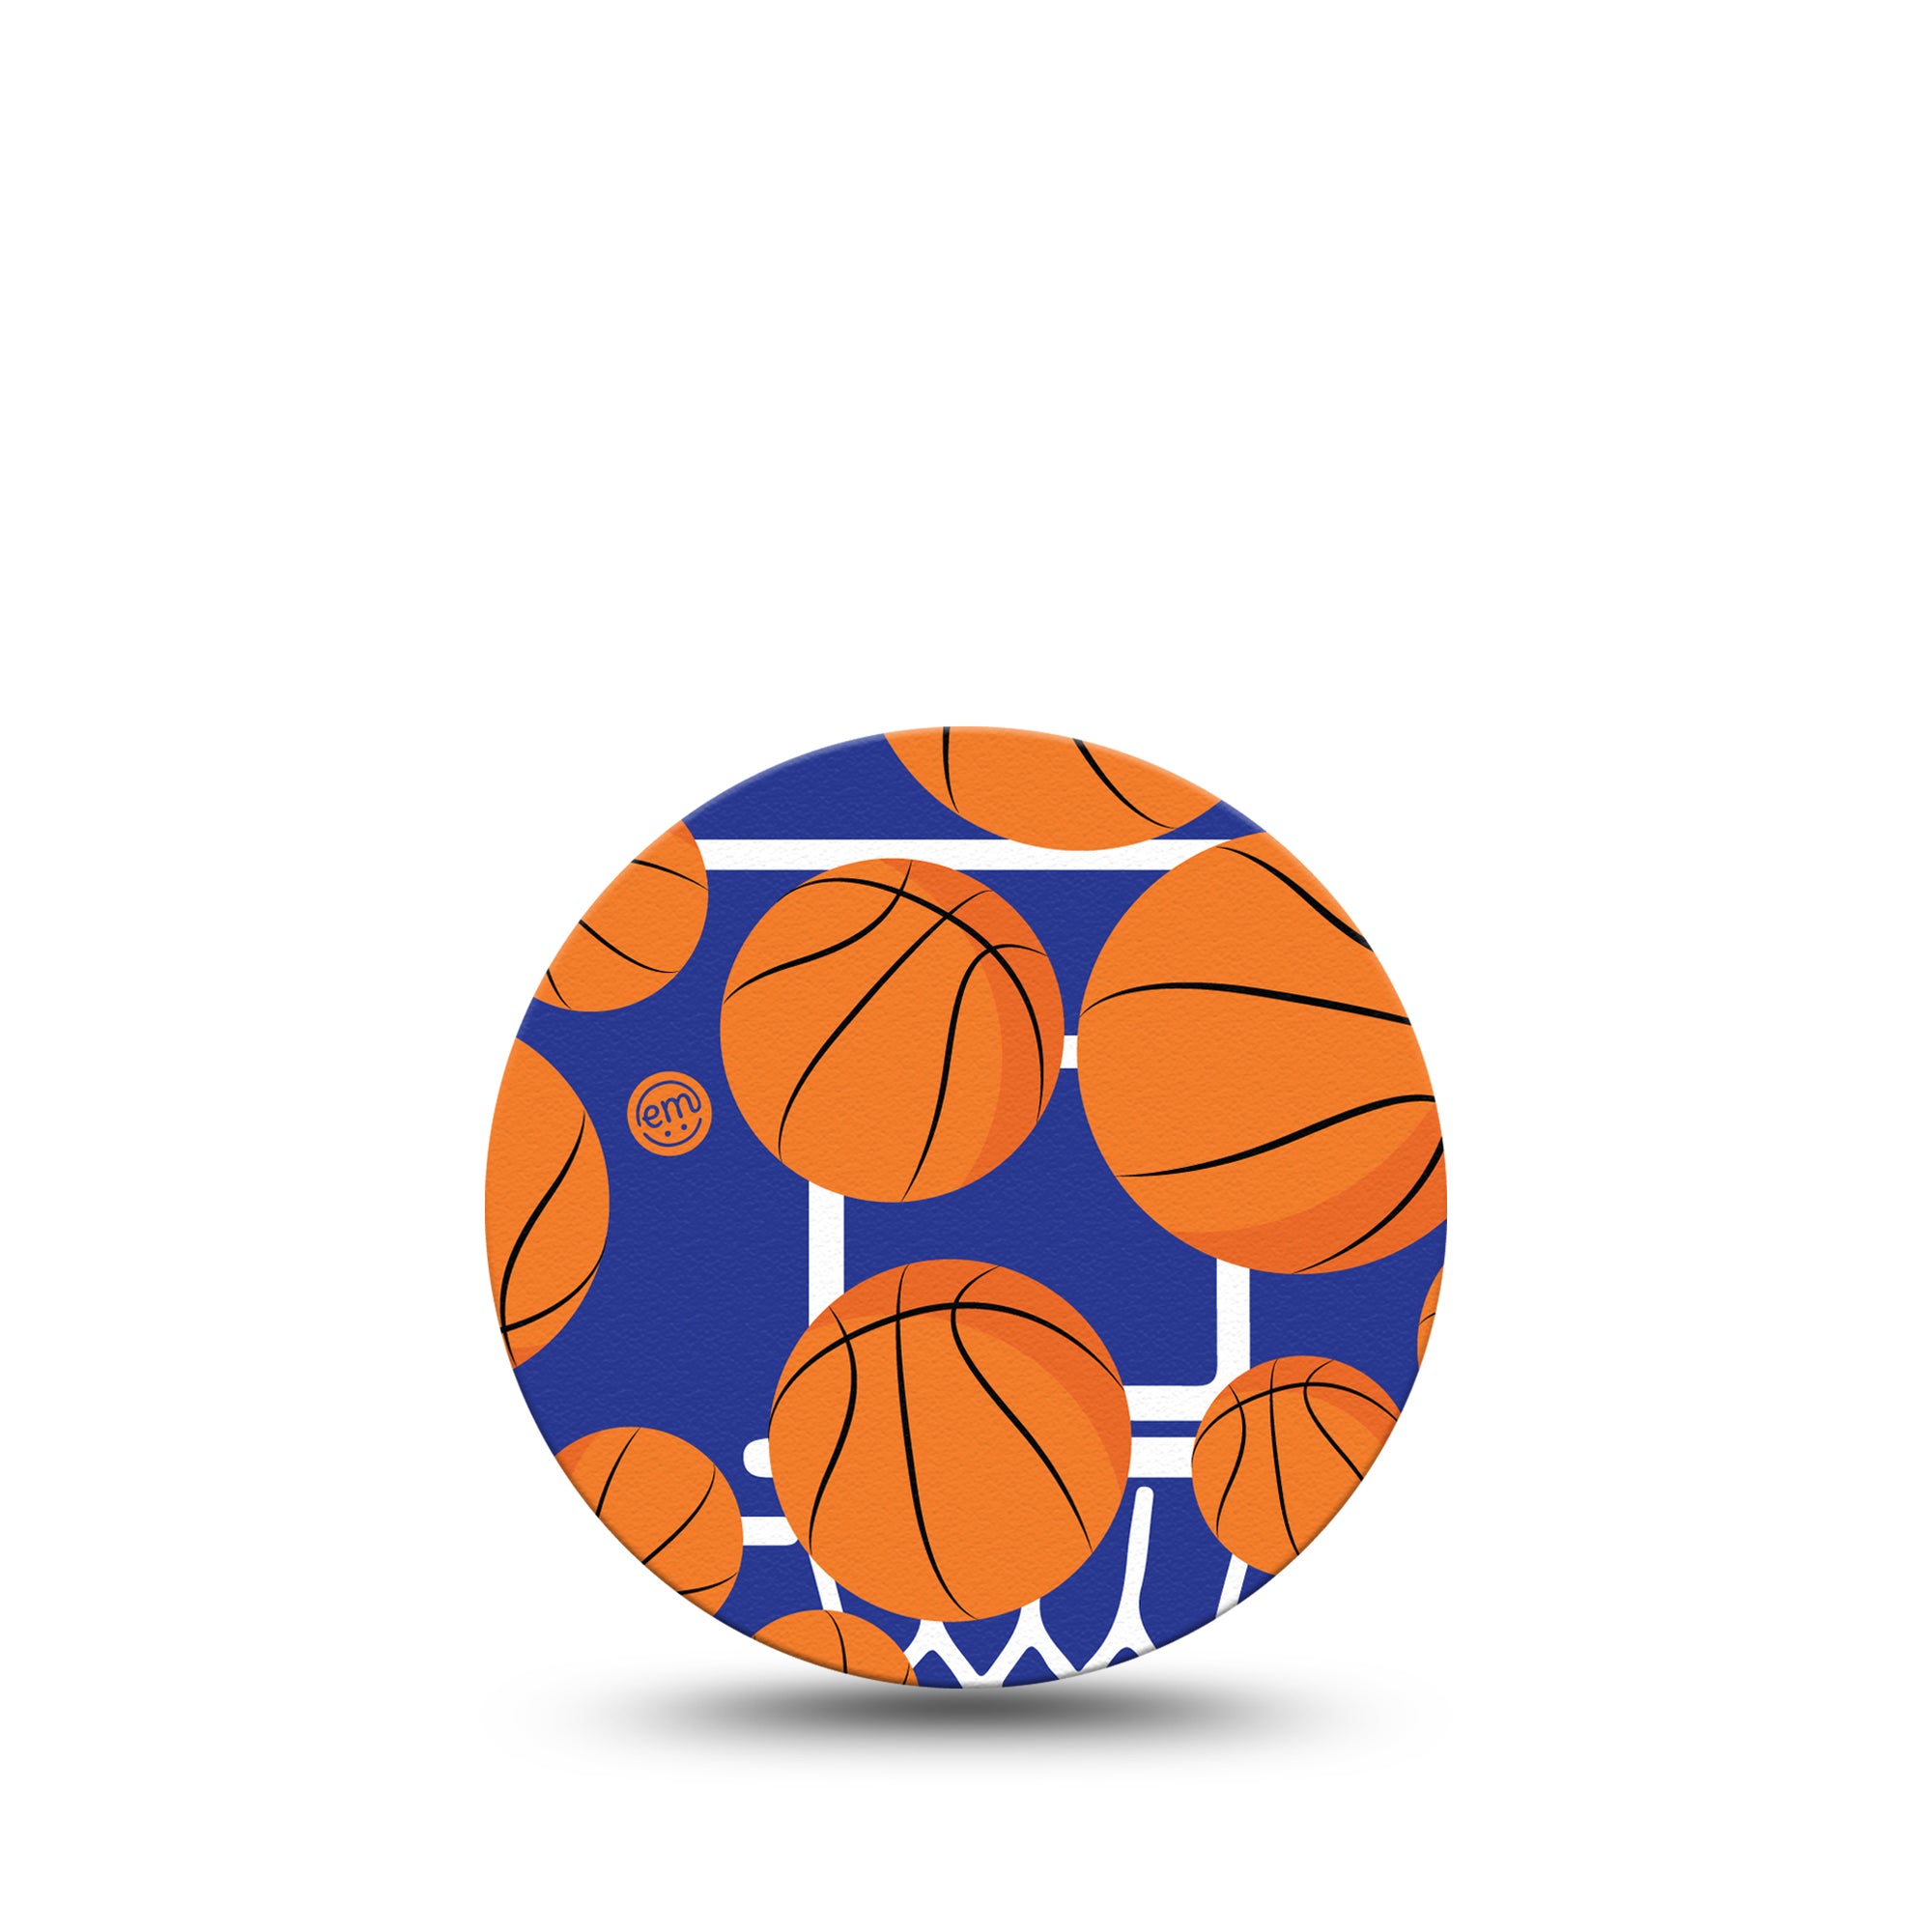 Basketball Libre 3 Overpatch Tape, Single, Basketballs and Hoop CGM Adhesive Patch Design